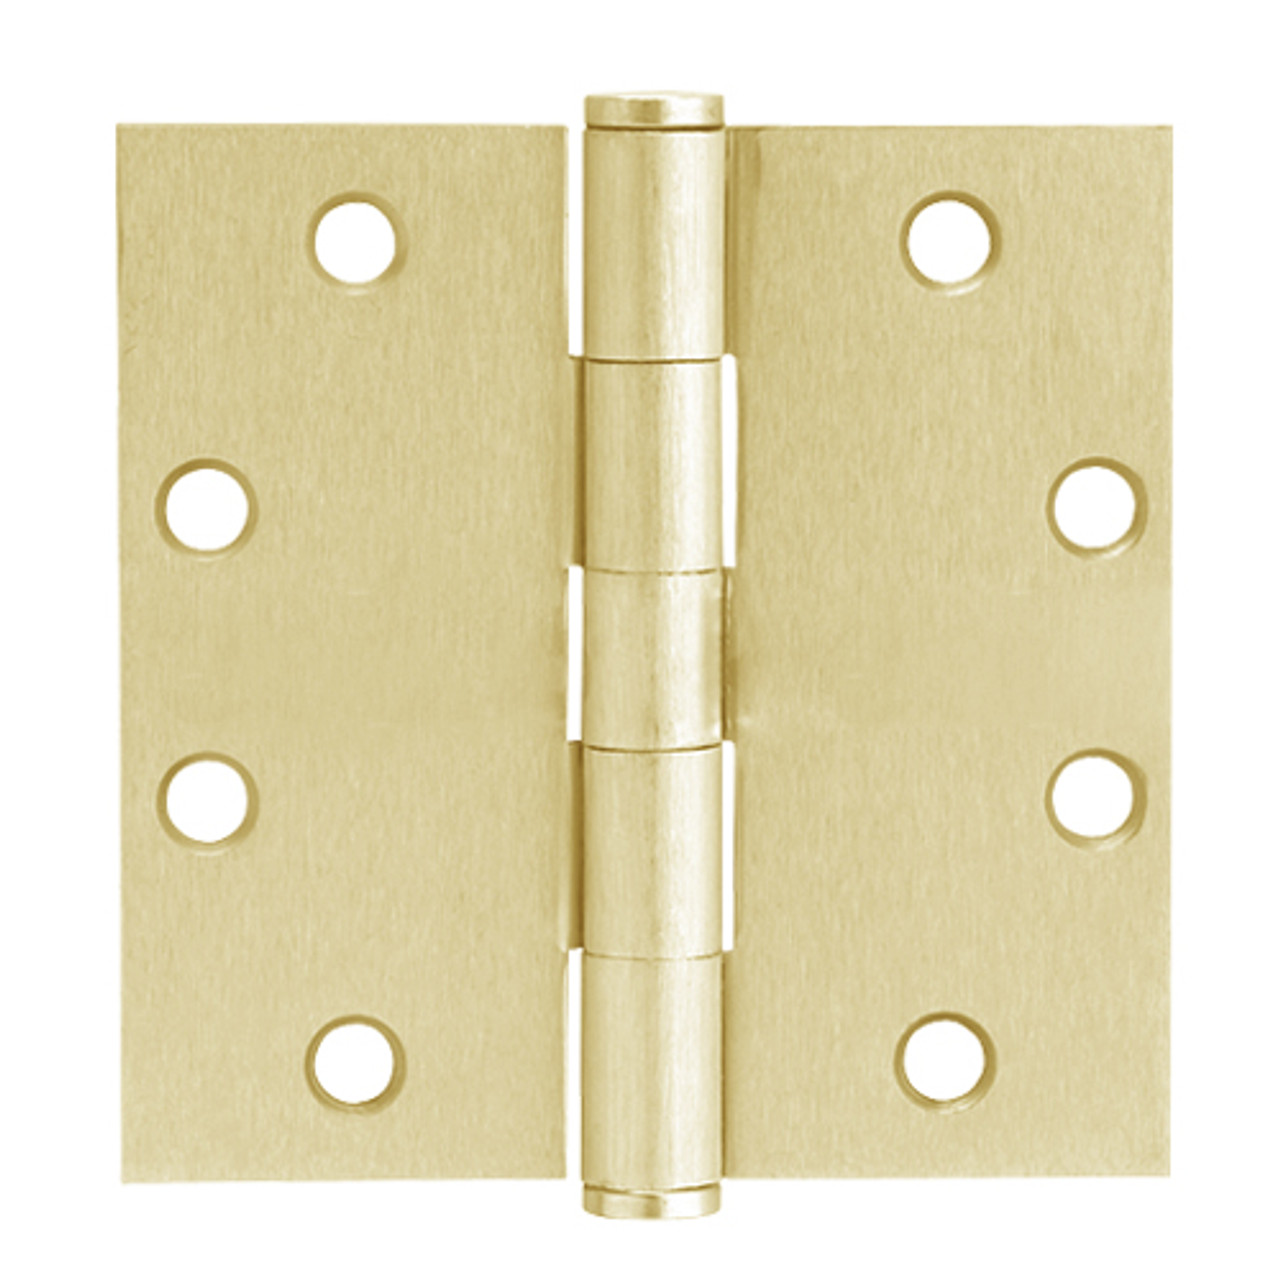 5PB1-4-5x4-5-633 IVES 5 Knuckle Plain Bearing Full Mortise Hinge in Satin Brass Plated